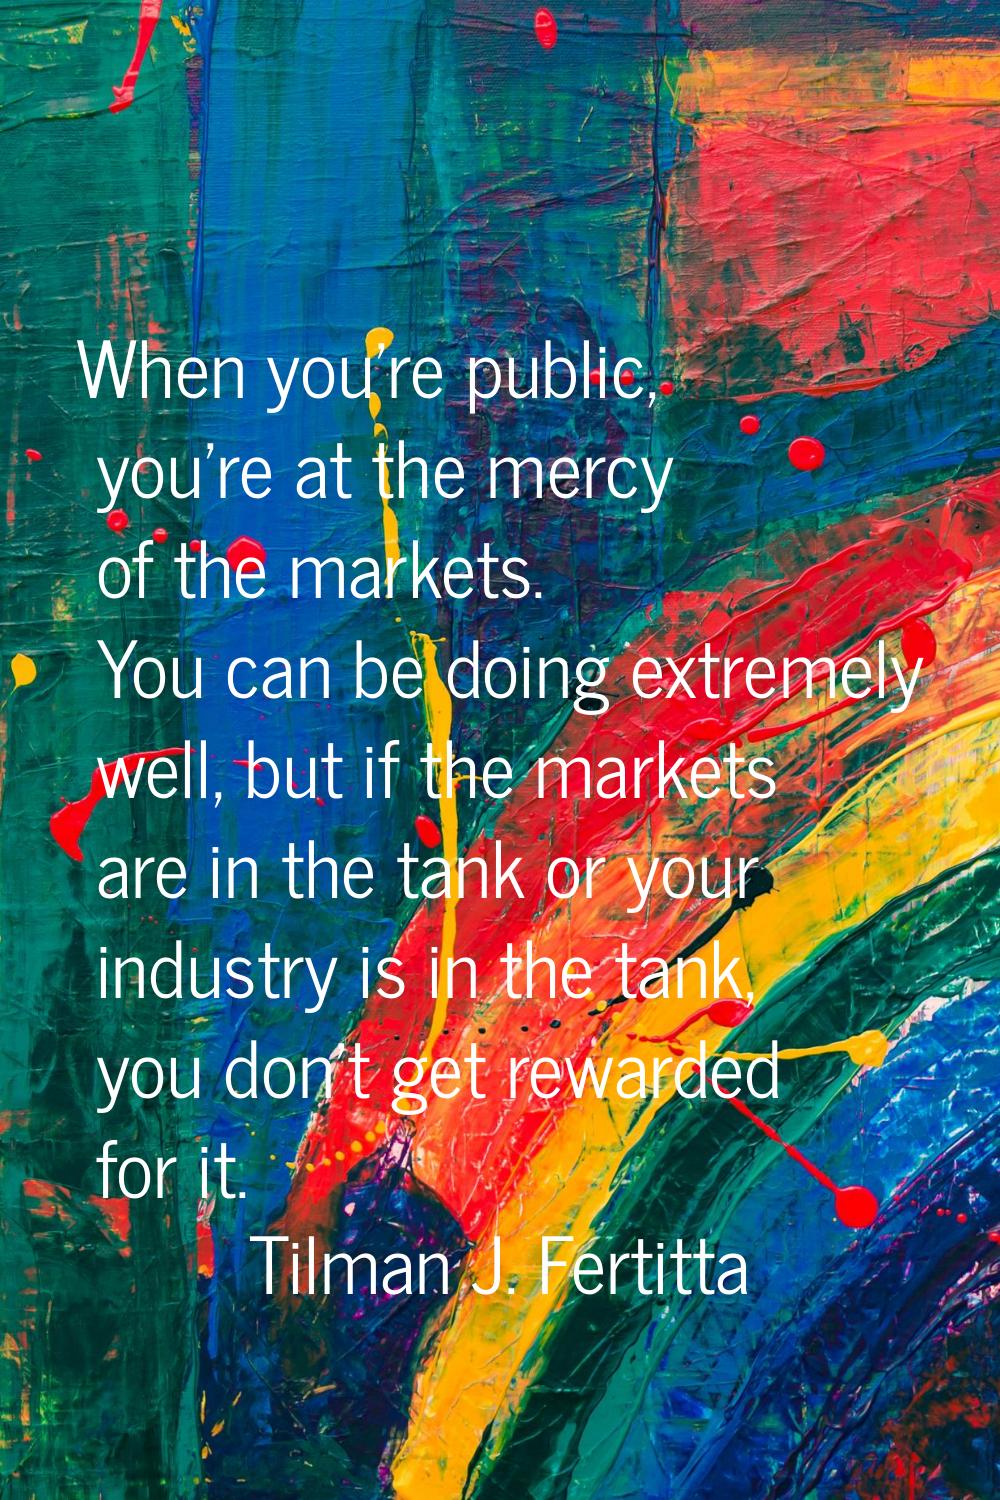 When you're public, you're at the mercy of the markets. You can be doing extremely well, but if the